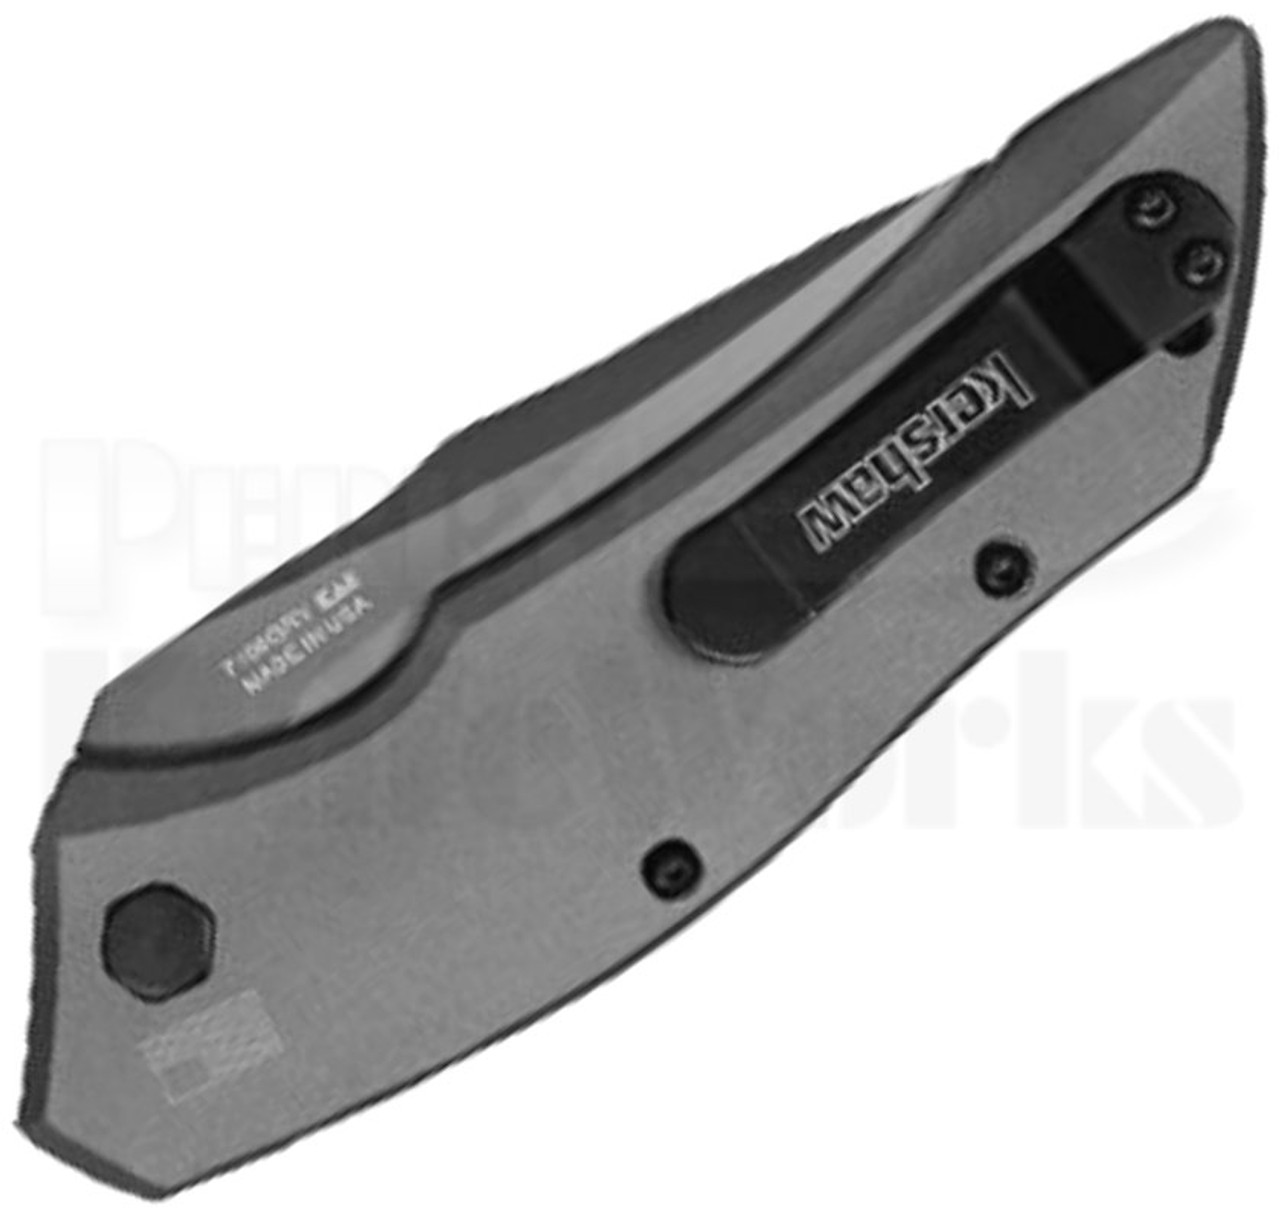 Kershaw Launch 1 Gray Aluminum Automatic Knife 7100GRY l For Sale